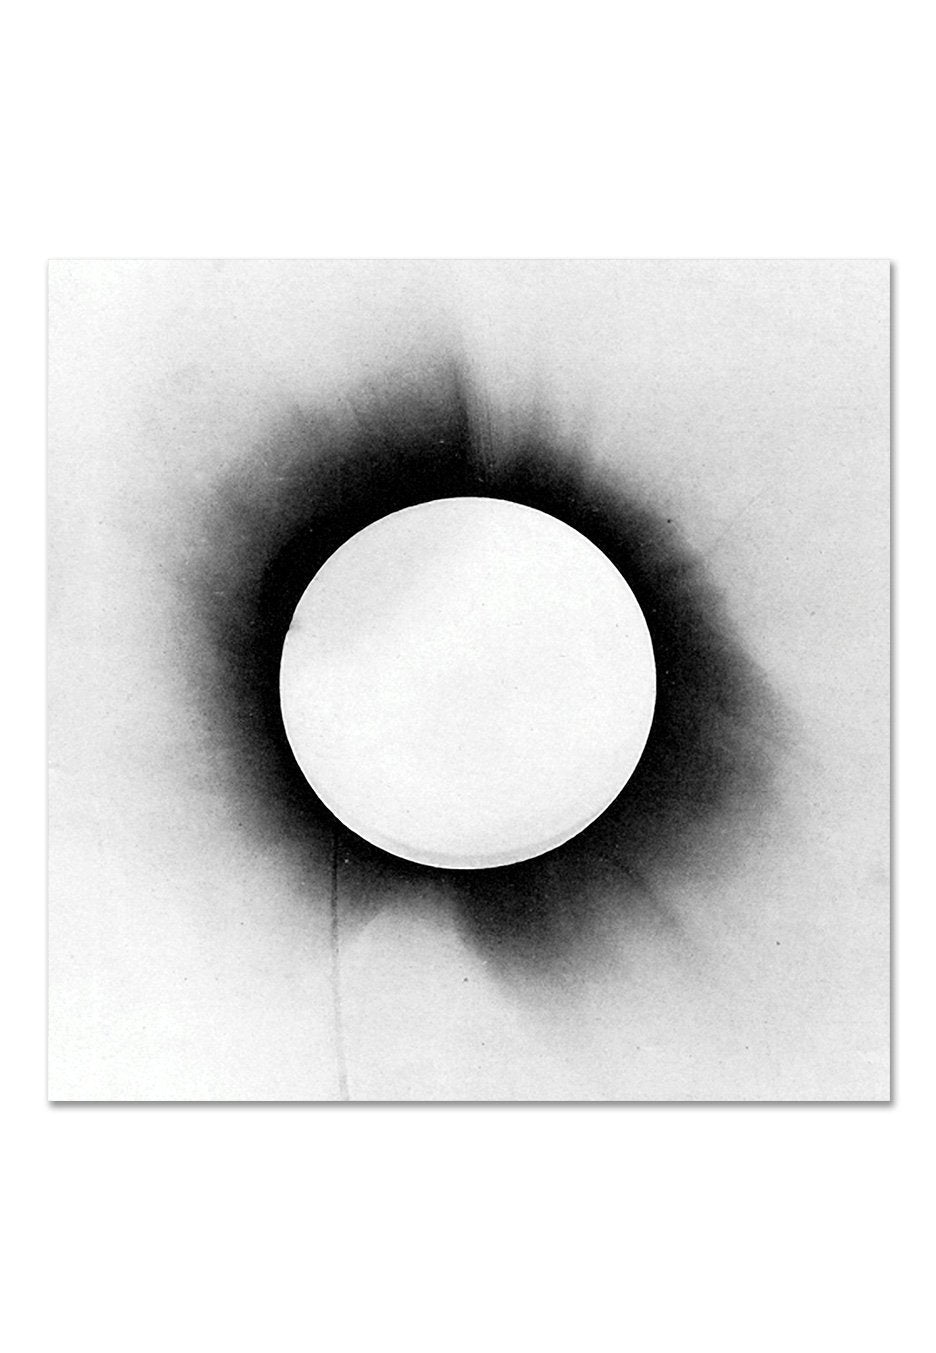 Architects - All Our Gods Have Abandoned Us (US Edition) - Vinyl